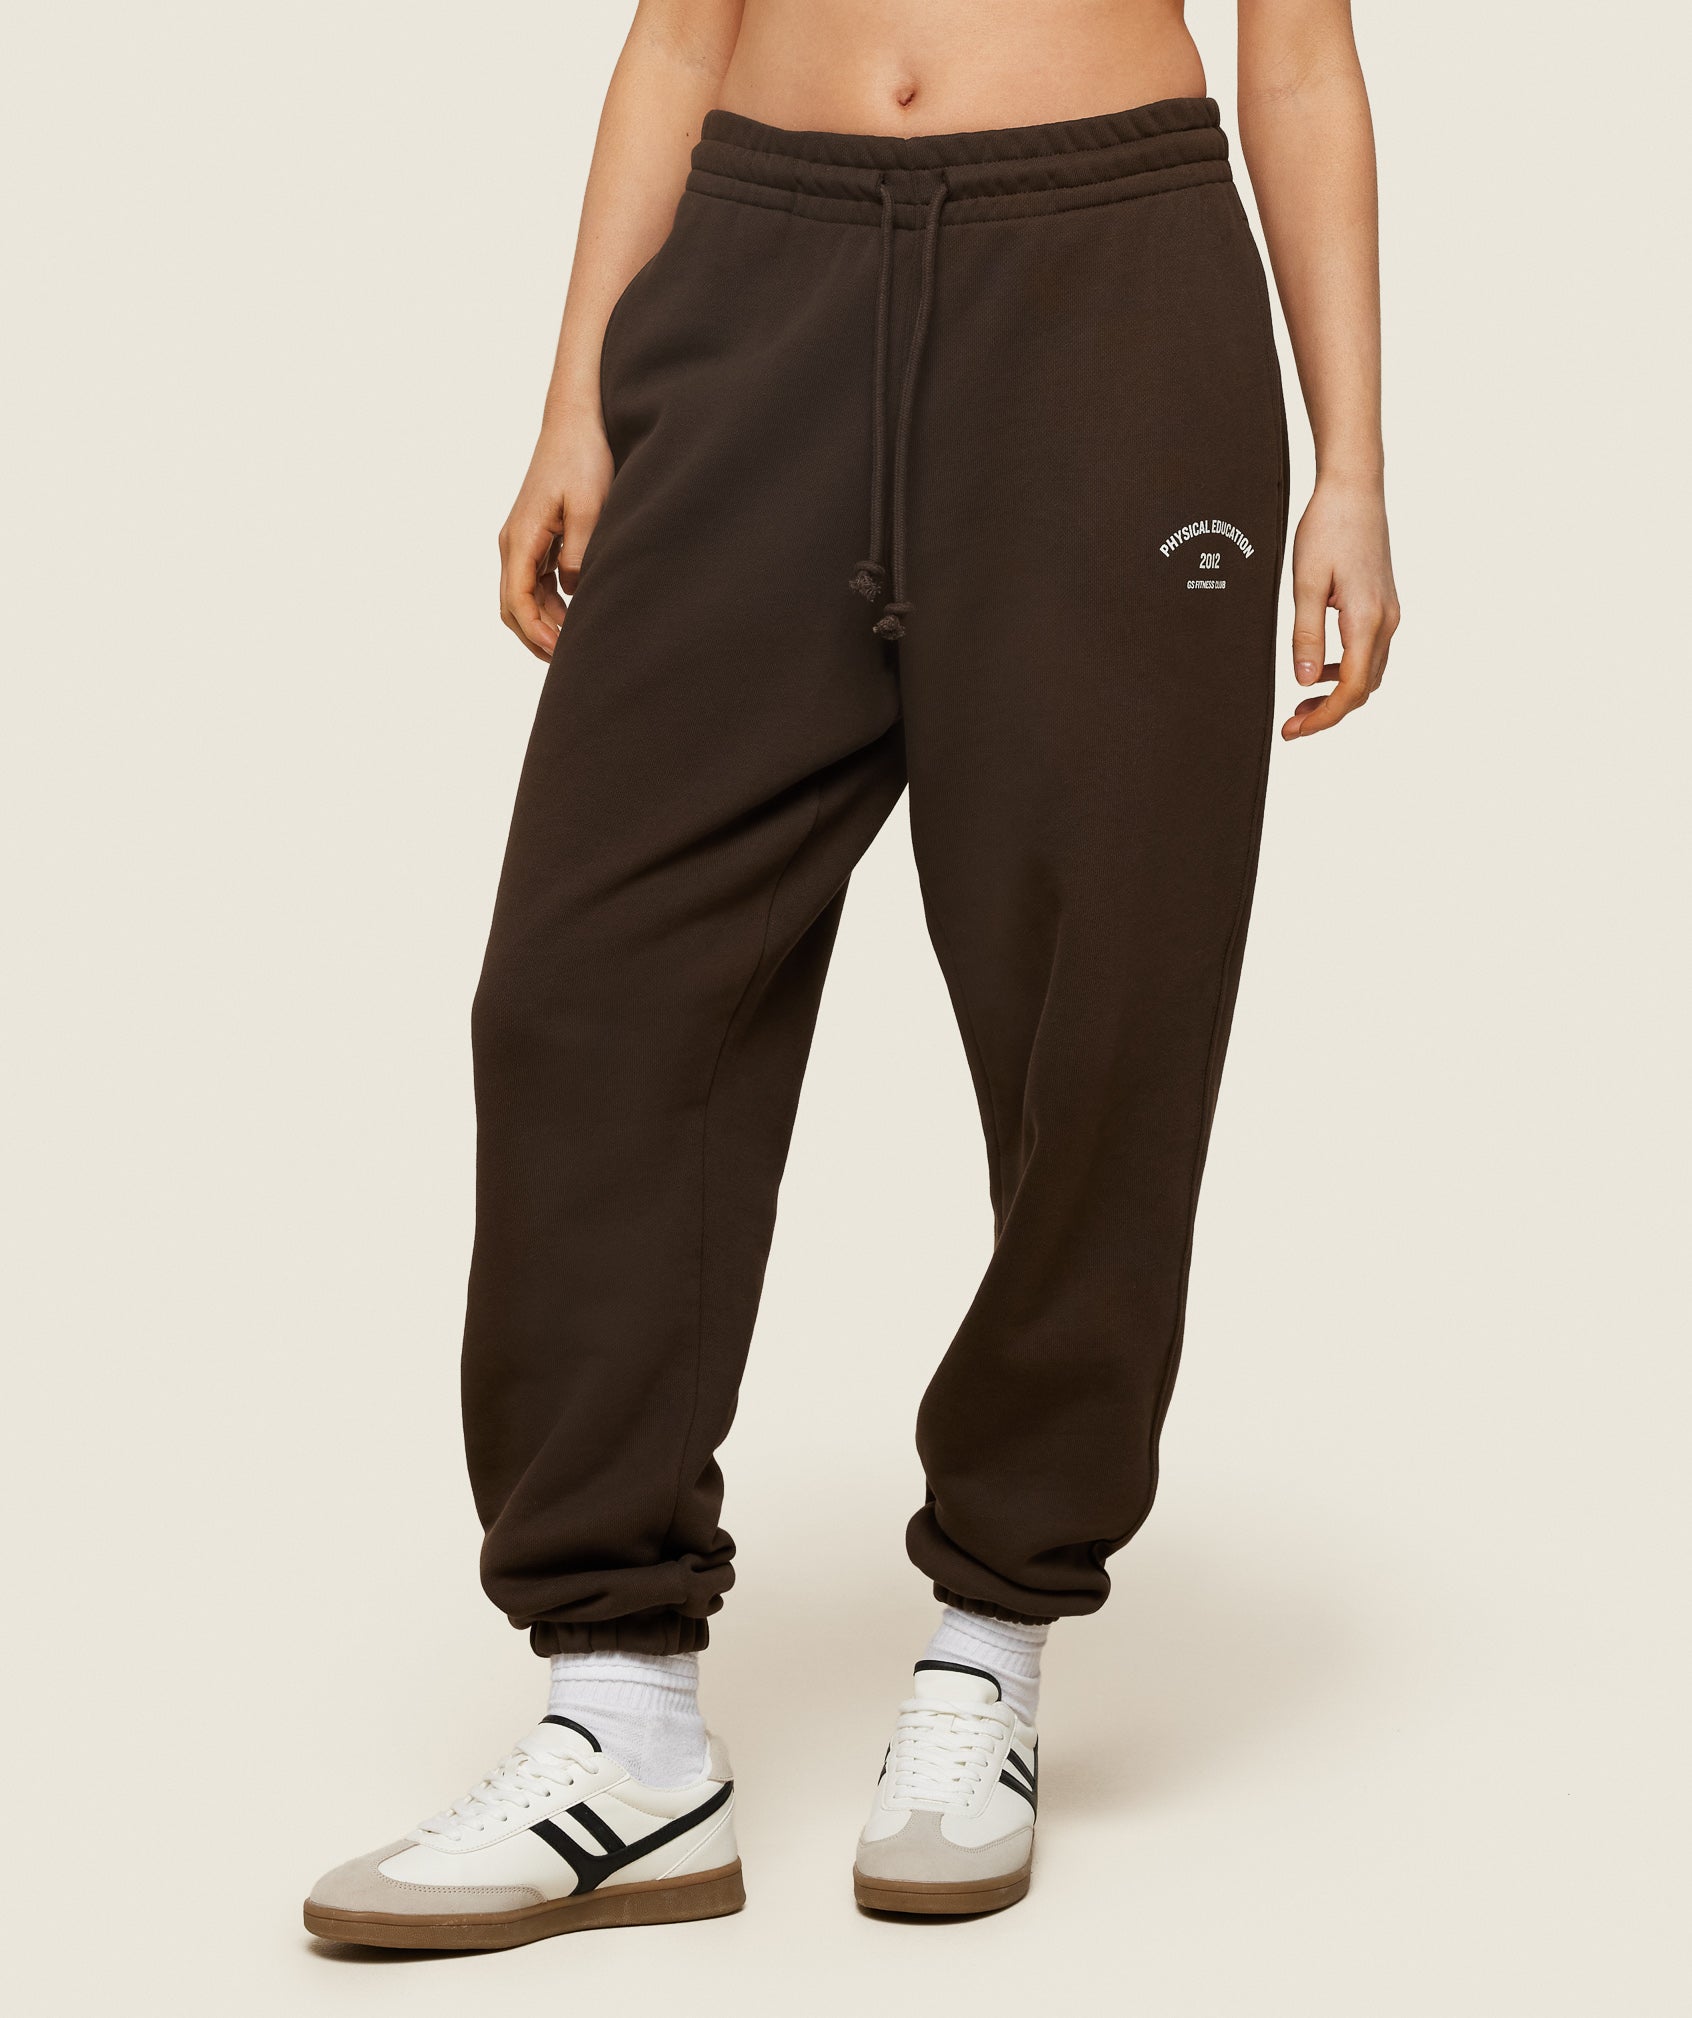 Phys Ed Graphic Sweatpants in Archive Brown - view 1